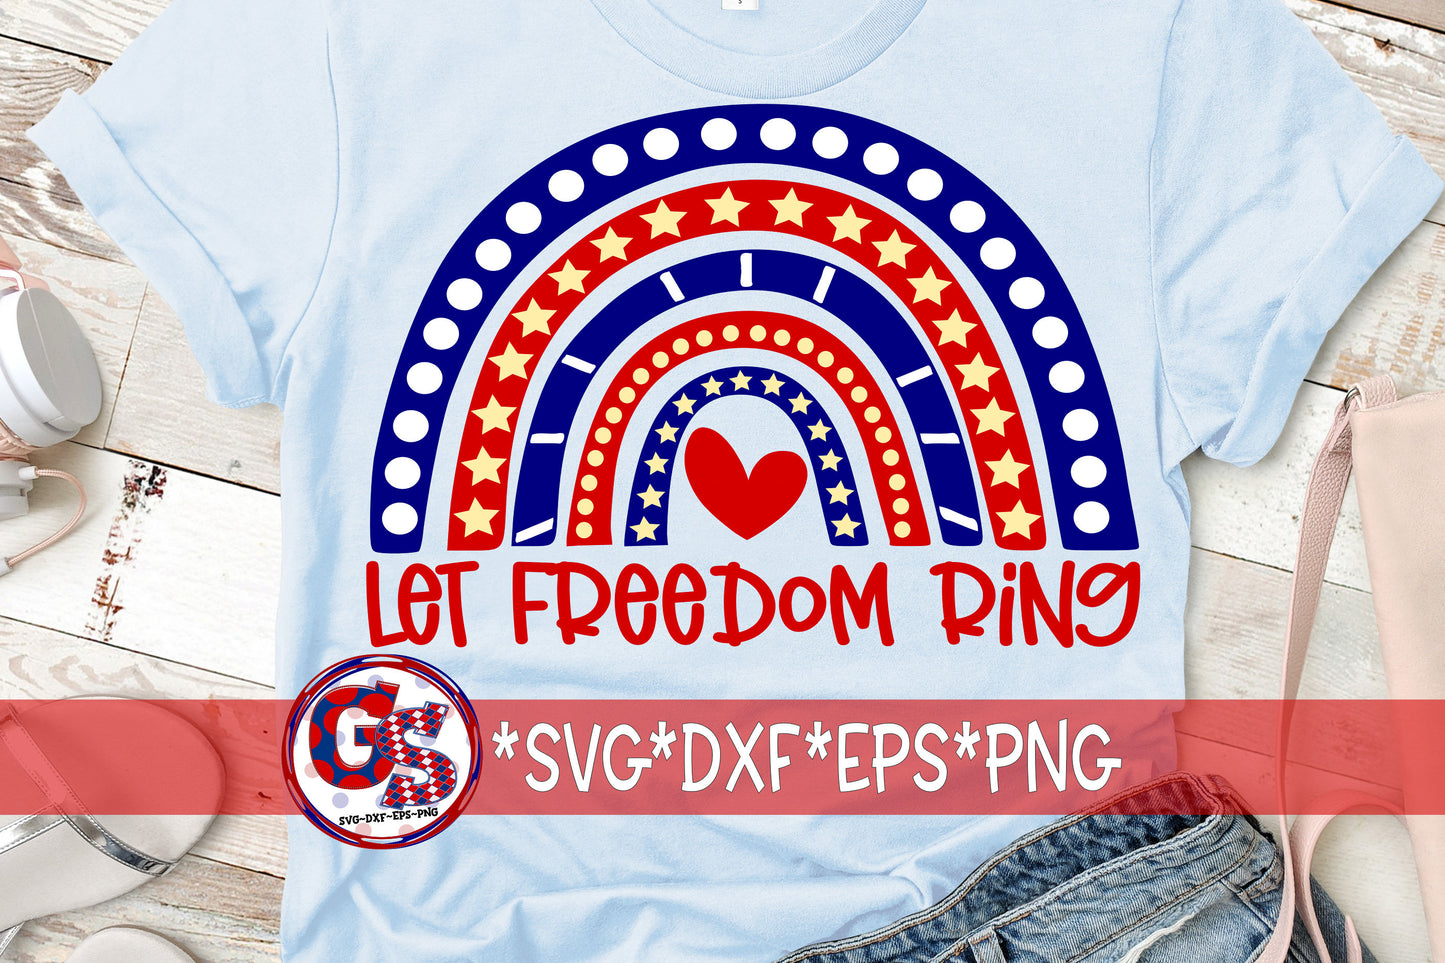 Let Freedom Ring Rainbow svg, eps, dxf, png. July 4th SvG | independence Day DxF | Let Freedom Ring SvG | Instant Download Cut Files